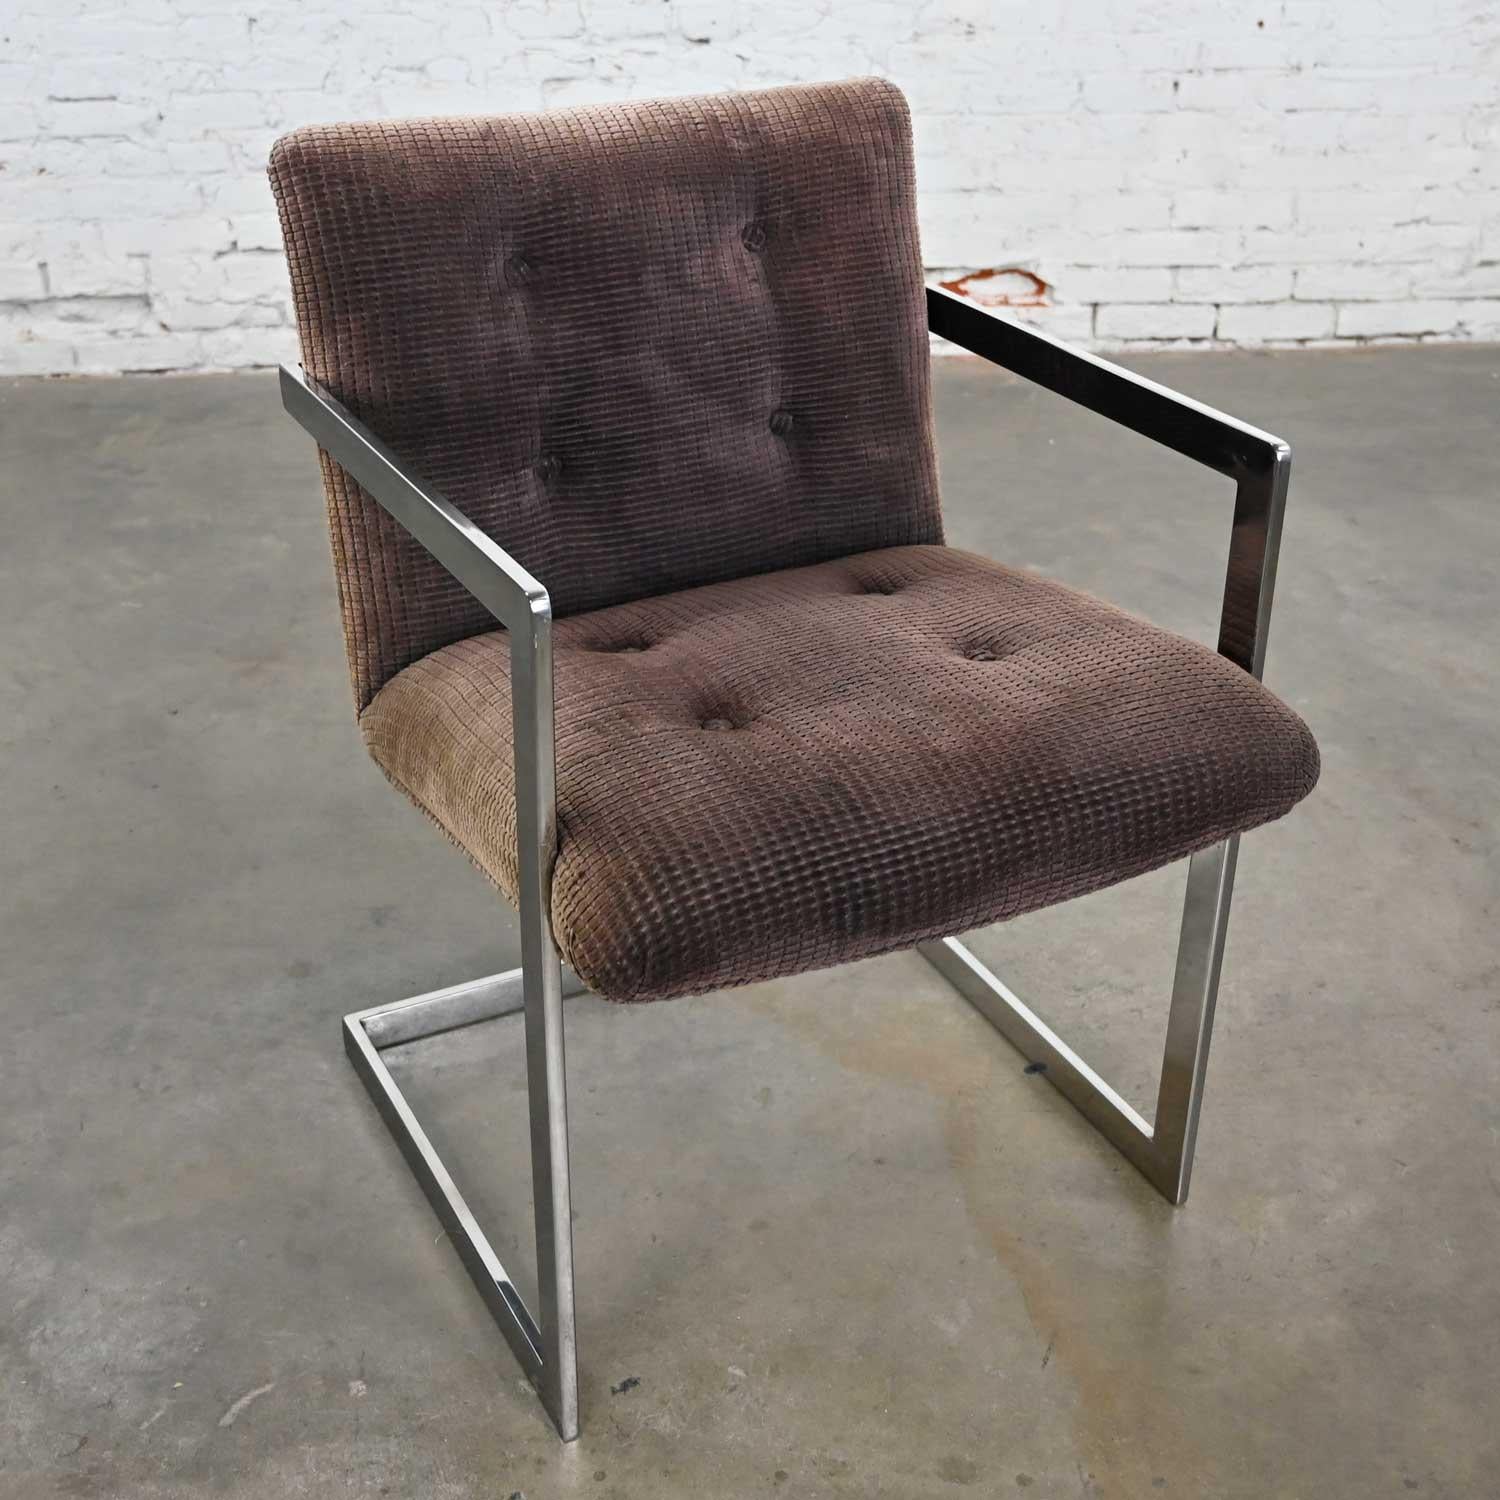 Handsome vintage modern chrome & brown chenille cantilever chair in the style of Brno by Knoll. Beautiful condition, keeping in mind that this is vintage and not new so will have signs of use and wear. There is some minor discoloration on the back